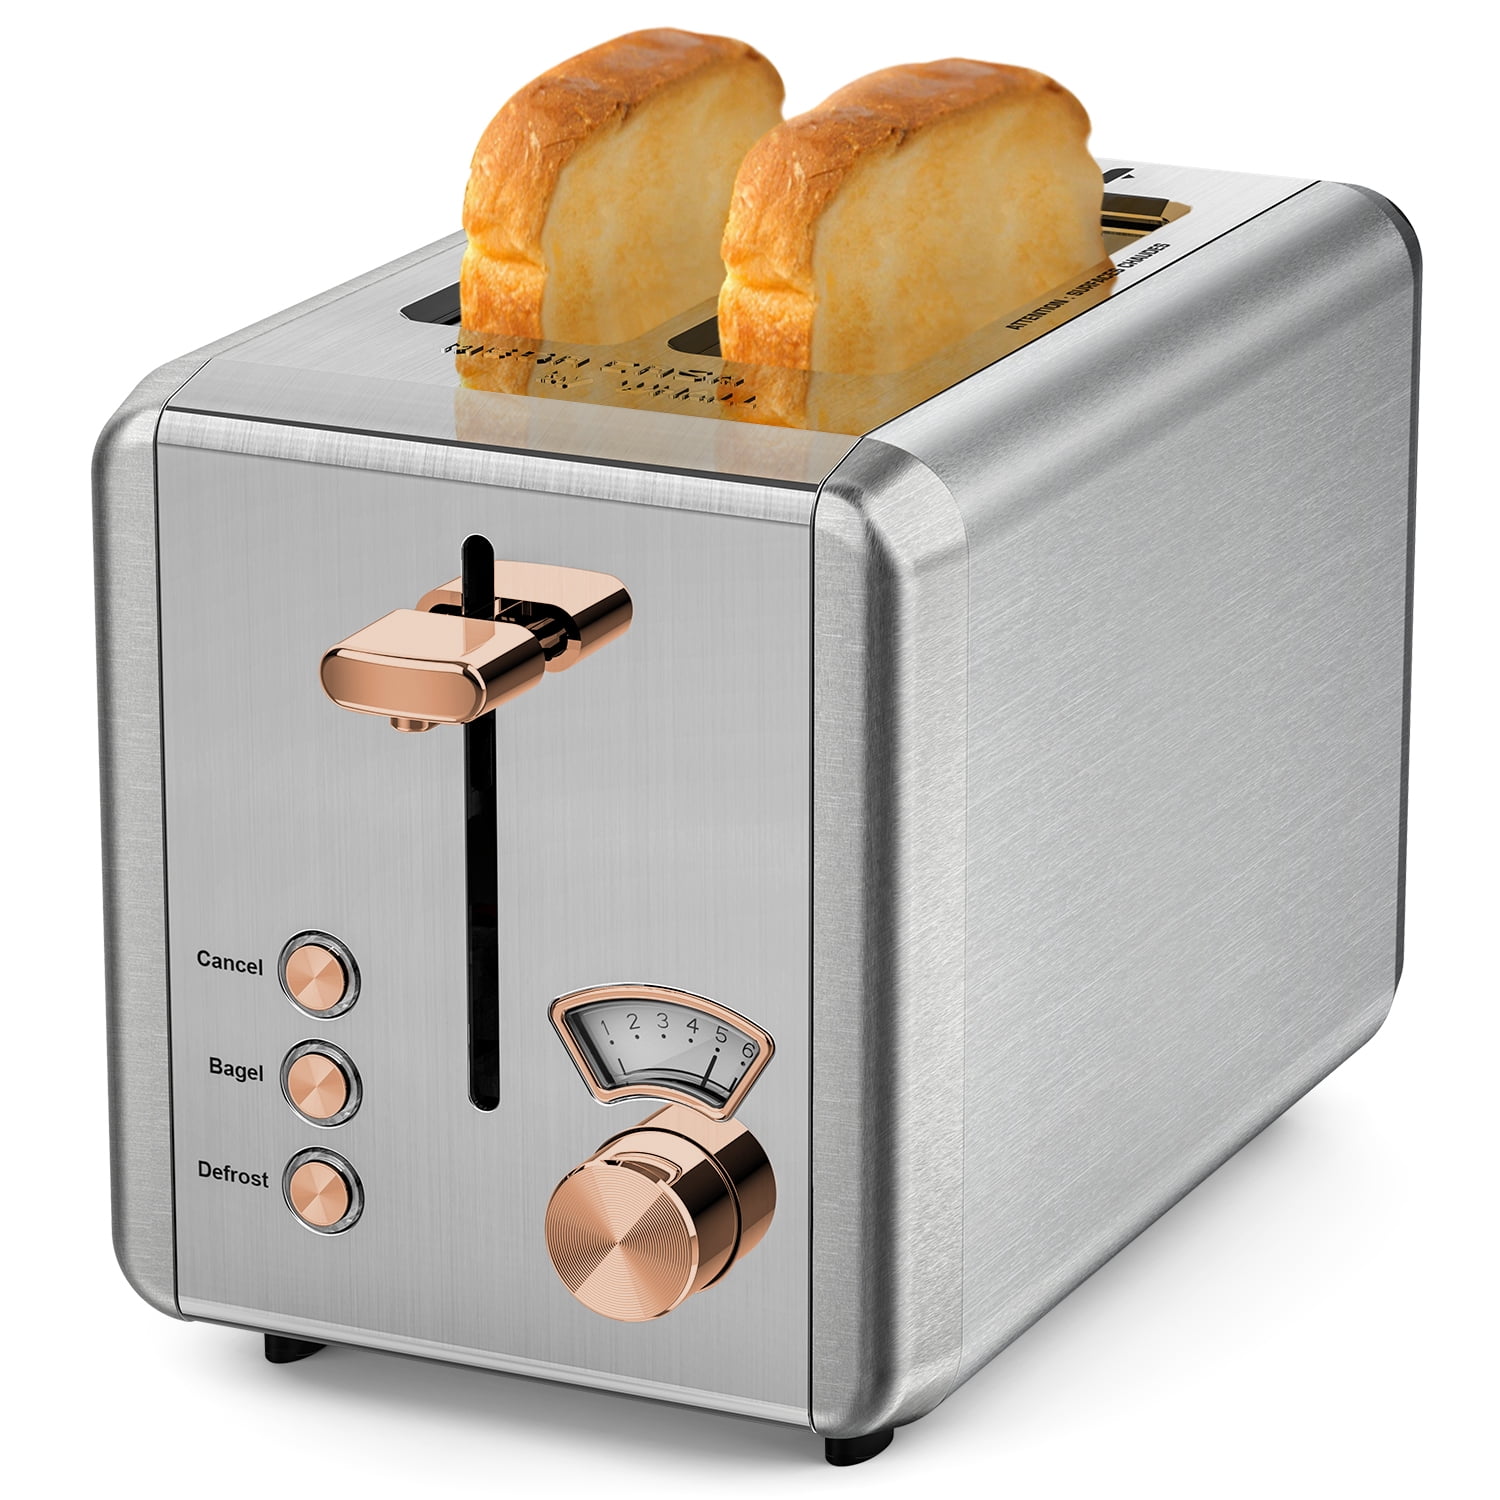 WHALL® 2 Slice Toaster - Stainless Steel Toaster with Wide Slot, 6 ...